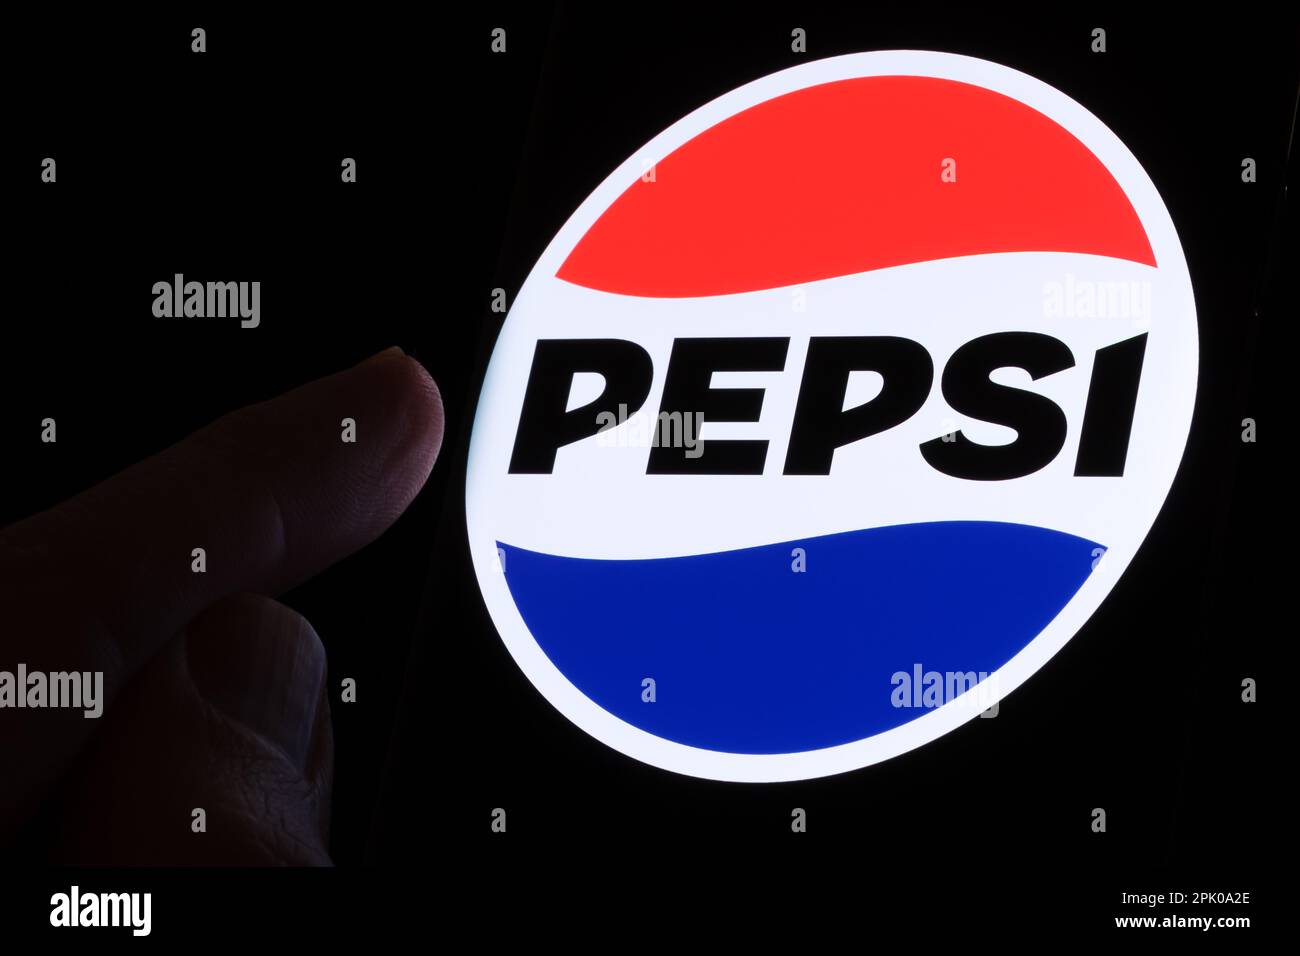 PEPSI new logo introduced in 2023 seen on the screen glowing in the dark and finger is pointing at it. Stafford, United Kingdom, April 3, 2023 Stock Photo